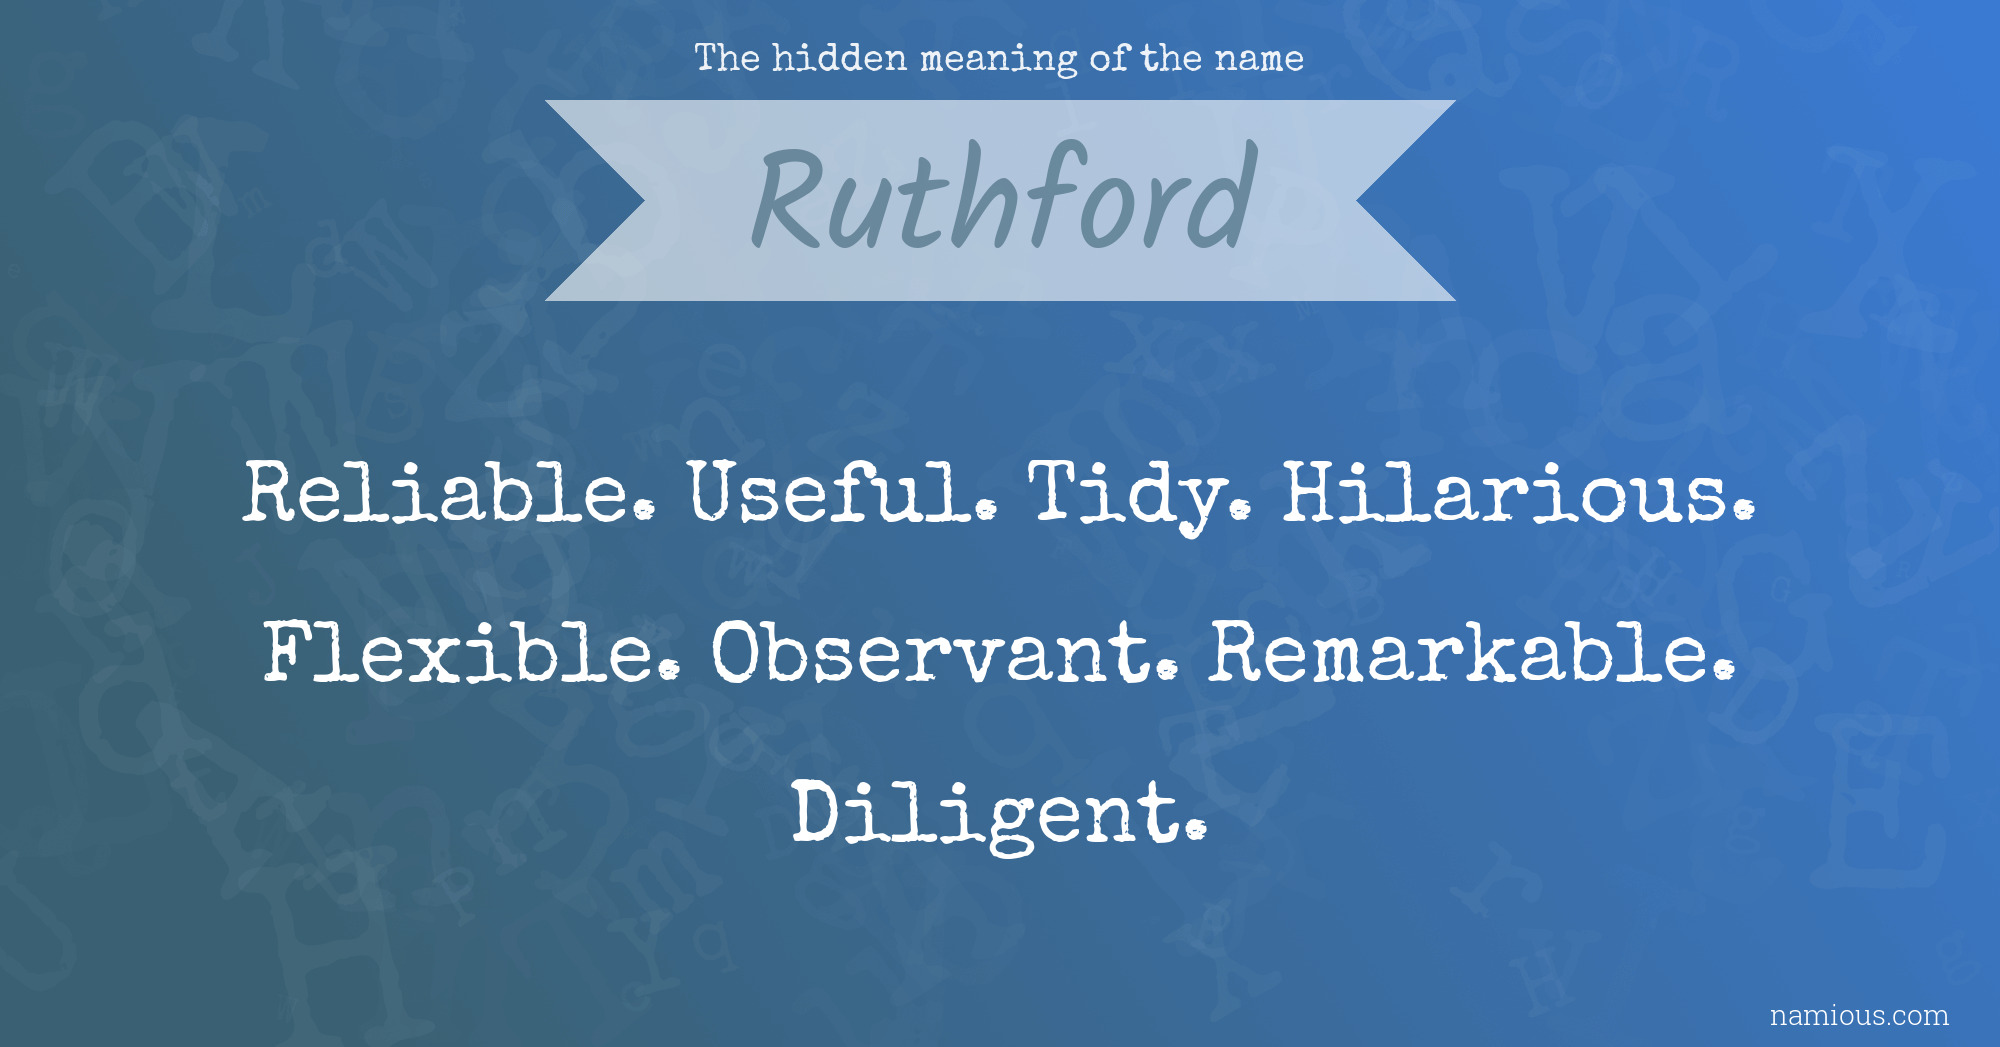 The hidden meaning of the name Ruthford